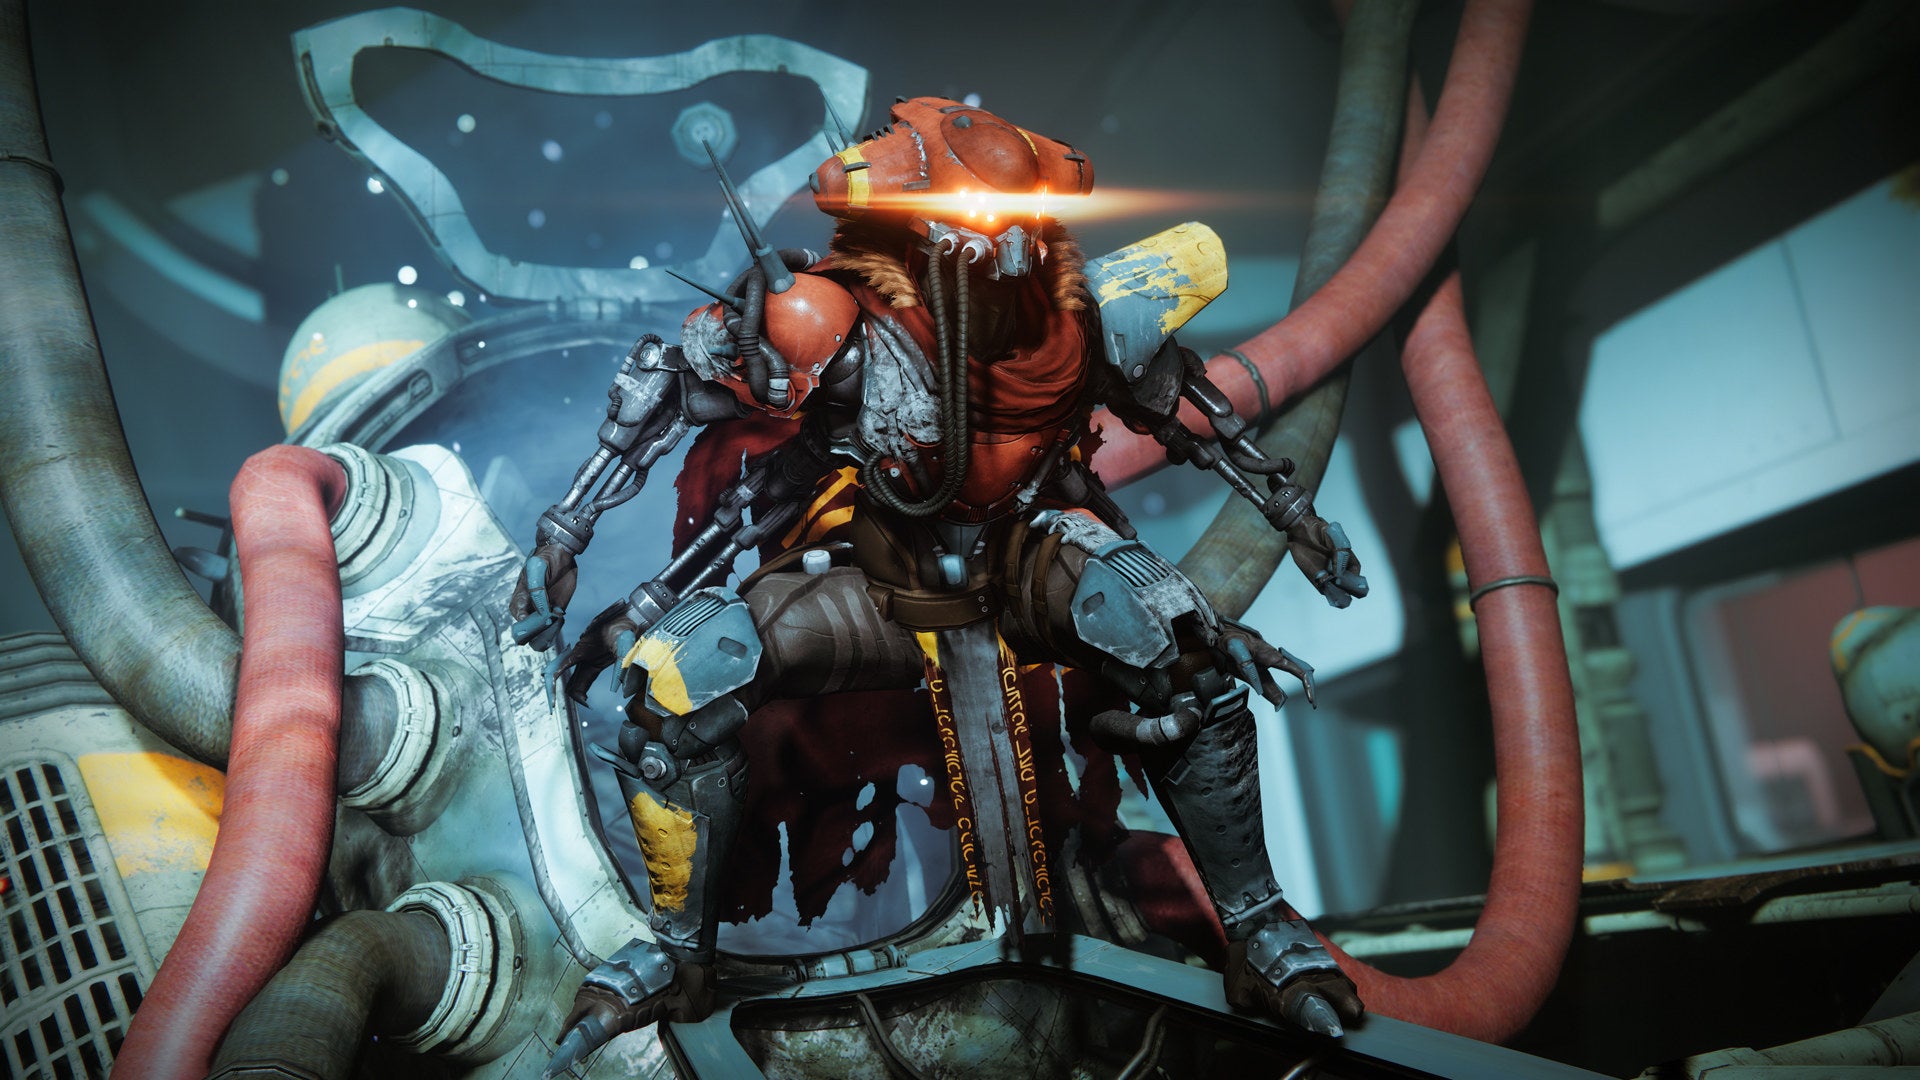 A Destiny 2 screenshot showing Taniks in the Deep Stone Crypt raid.